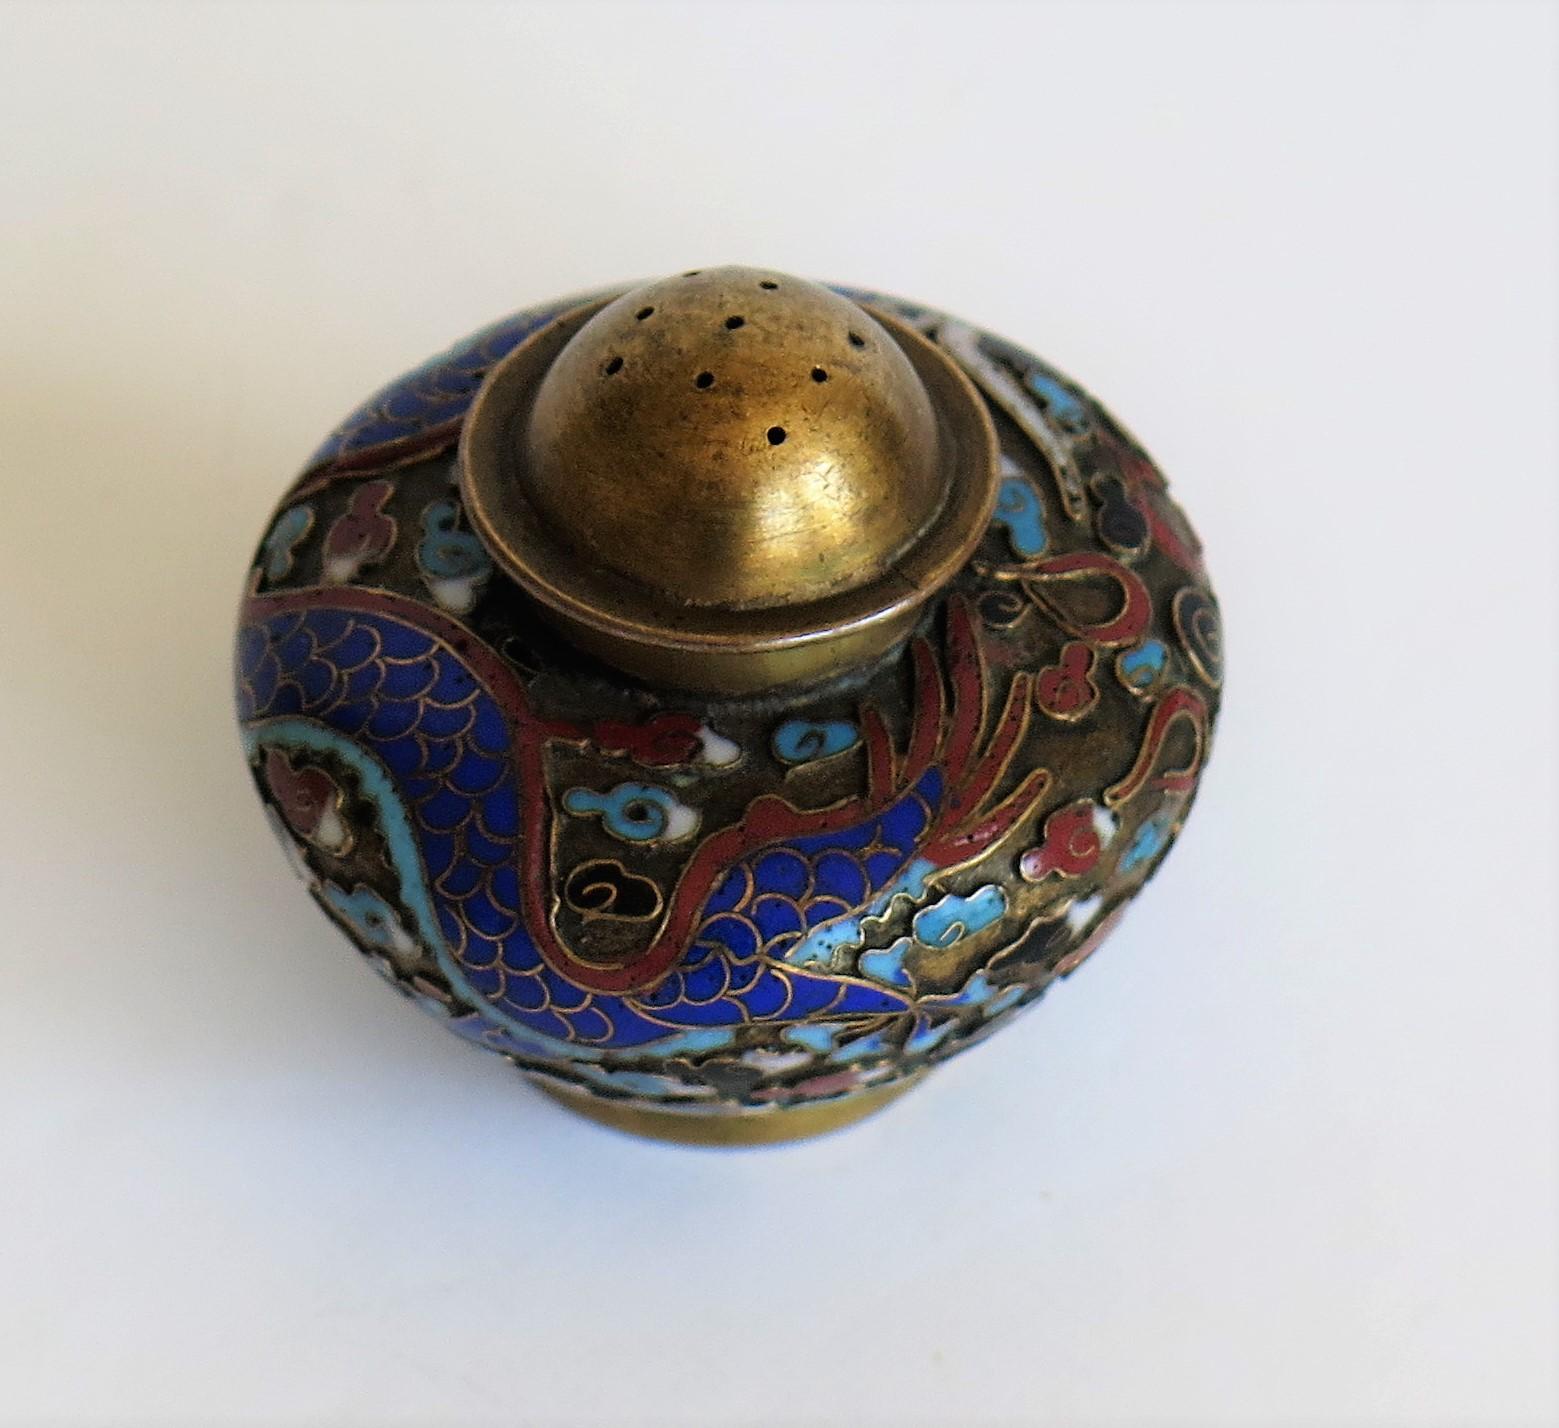 19th Century Chinese Cloisonné Pepper Pot with Dragon Decoration, Qing Dynasty 1